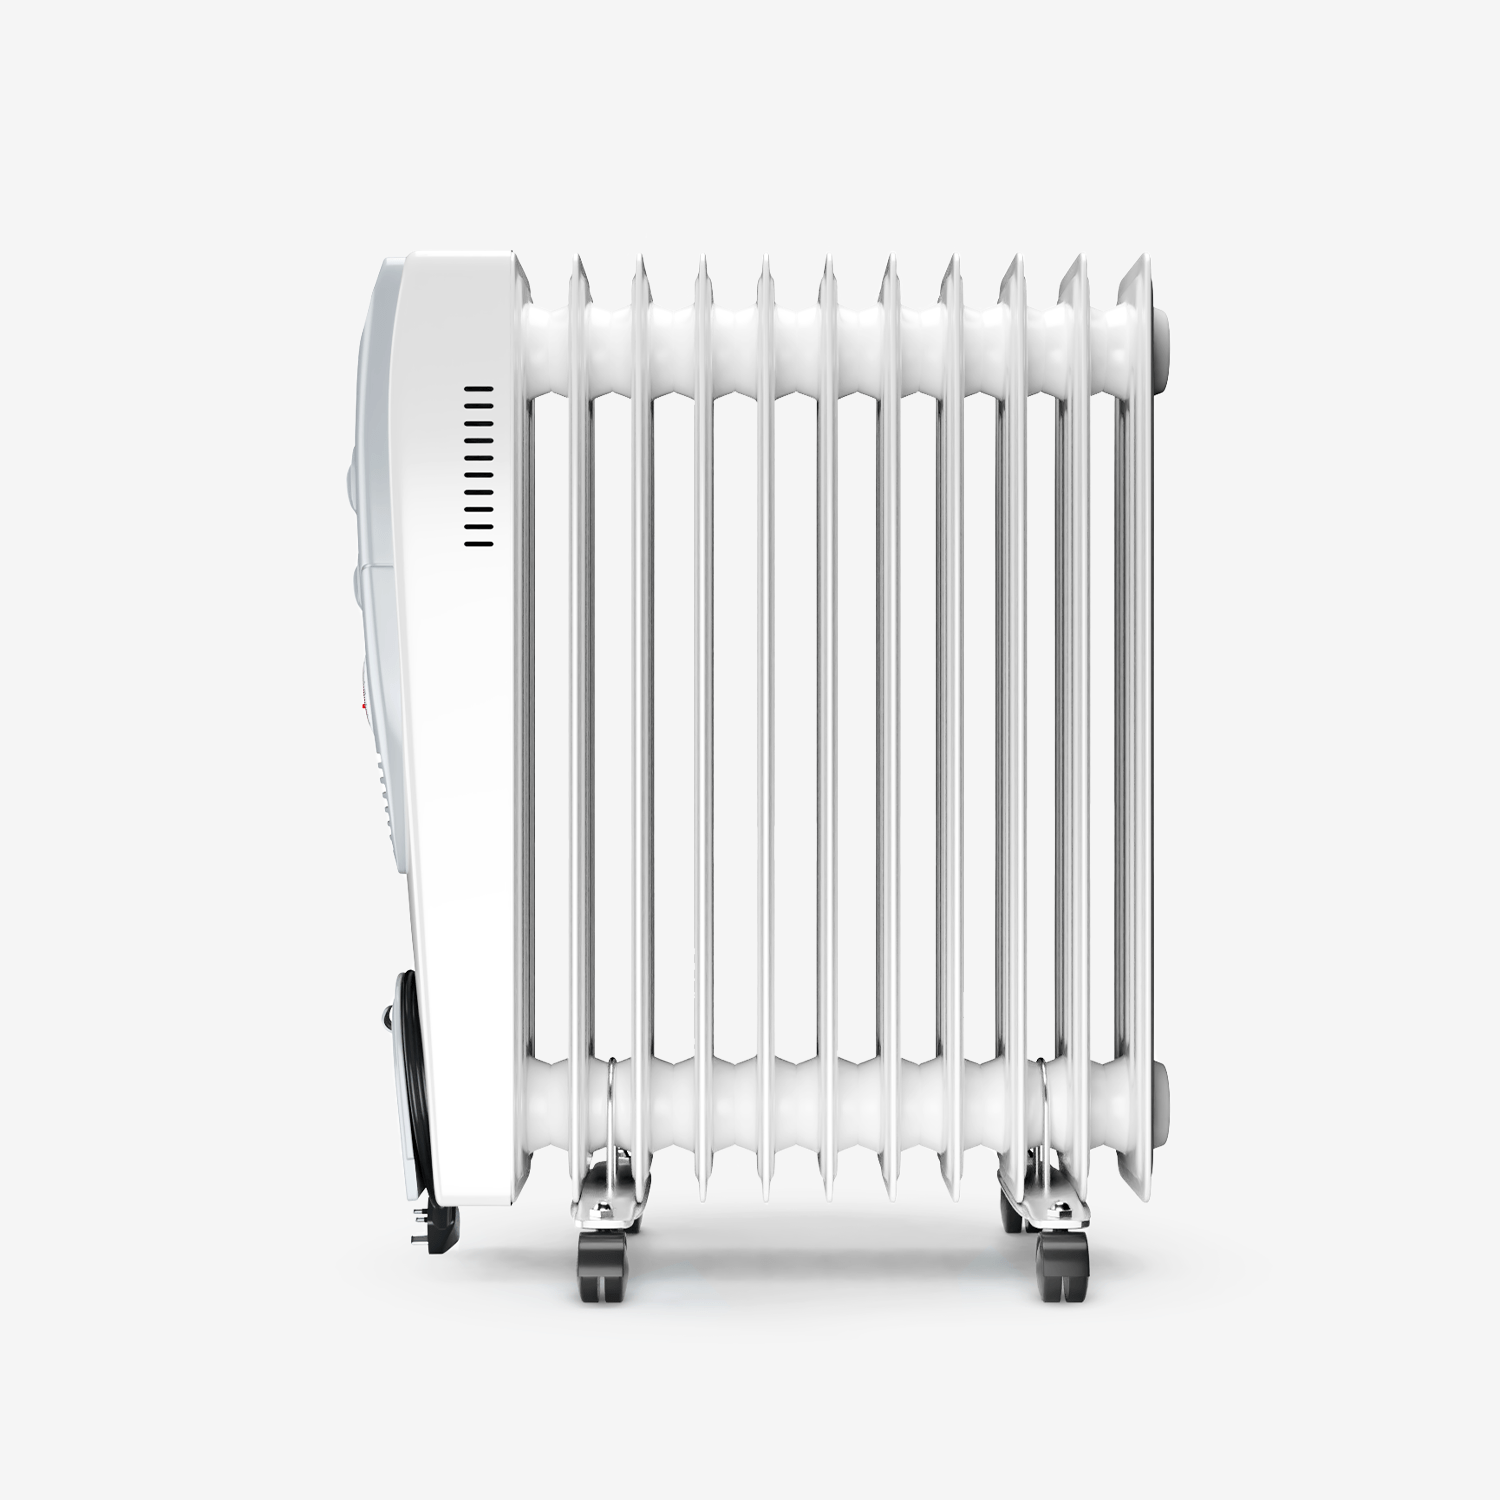 2500W Oil Filled Radiator with 11 Fins